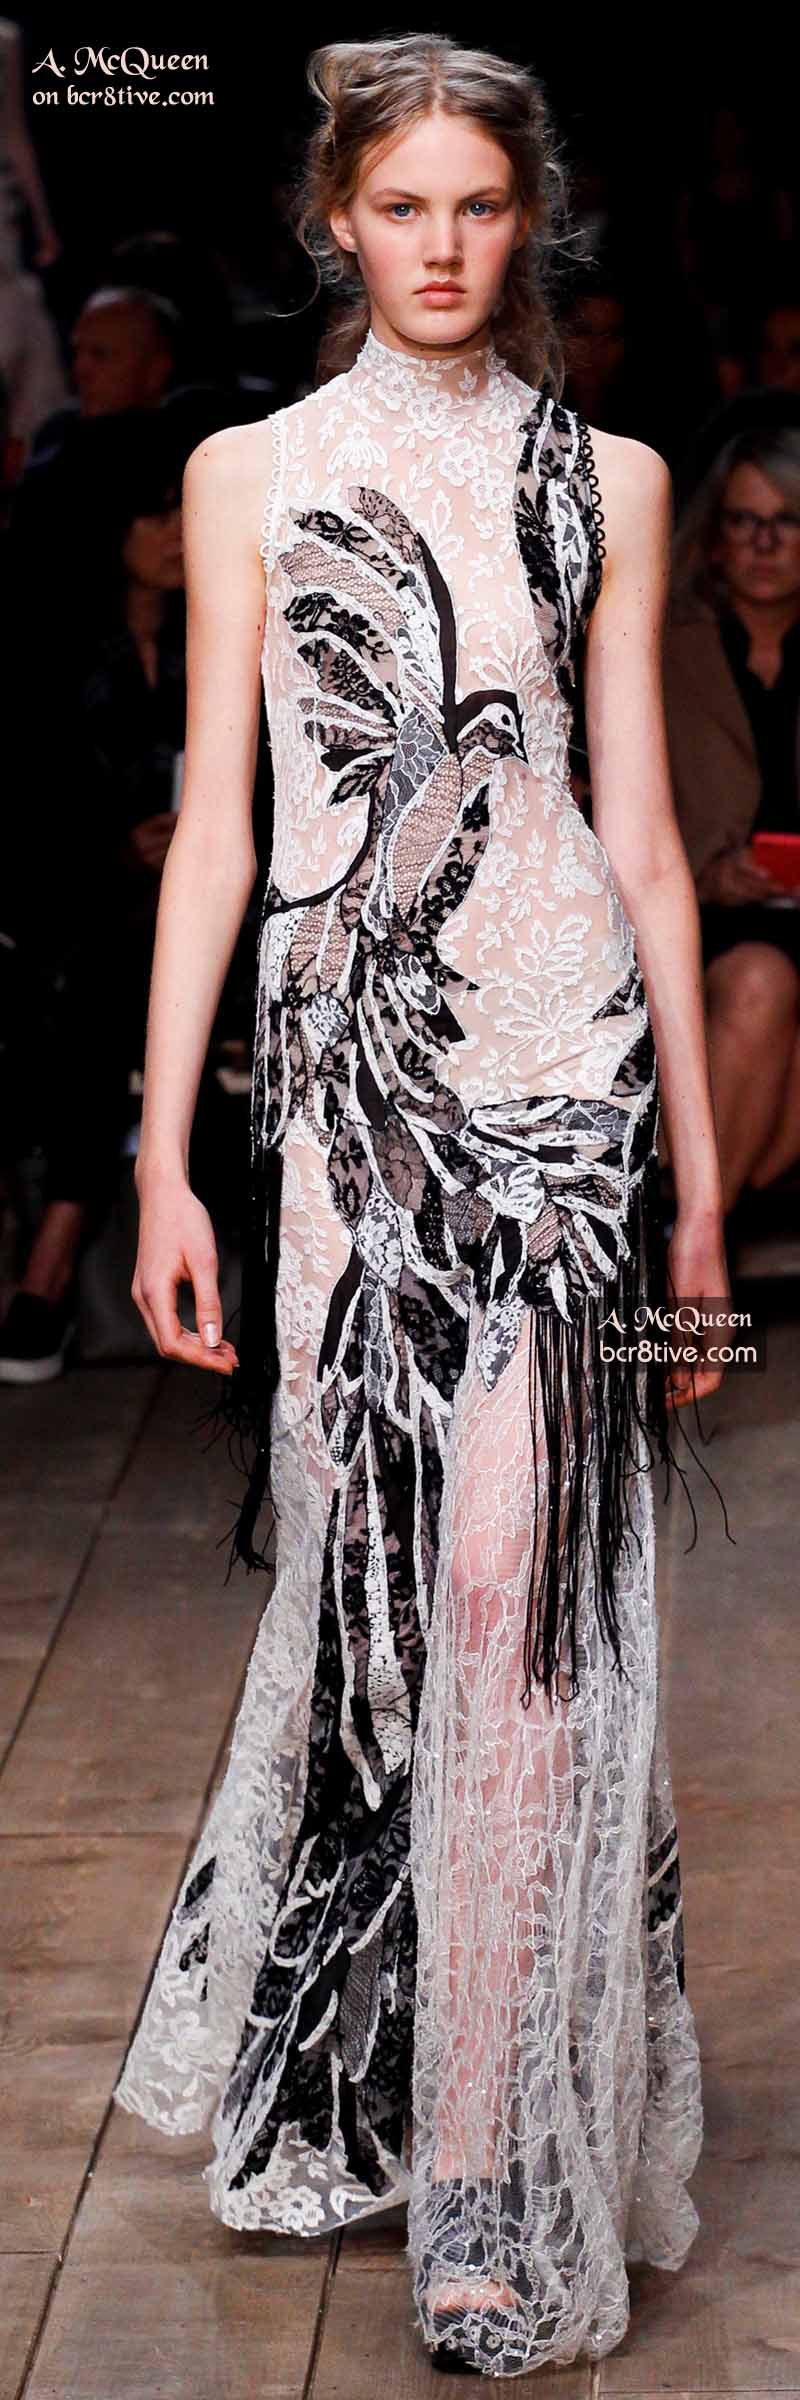 Embroidered Bird Lace Evening Gown - The Best of Alexander McQueen 2016